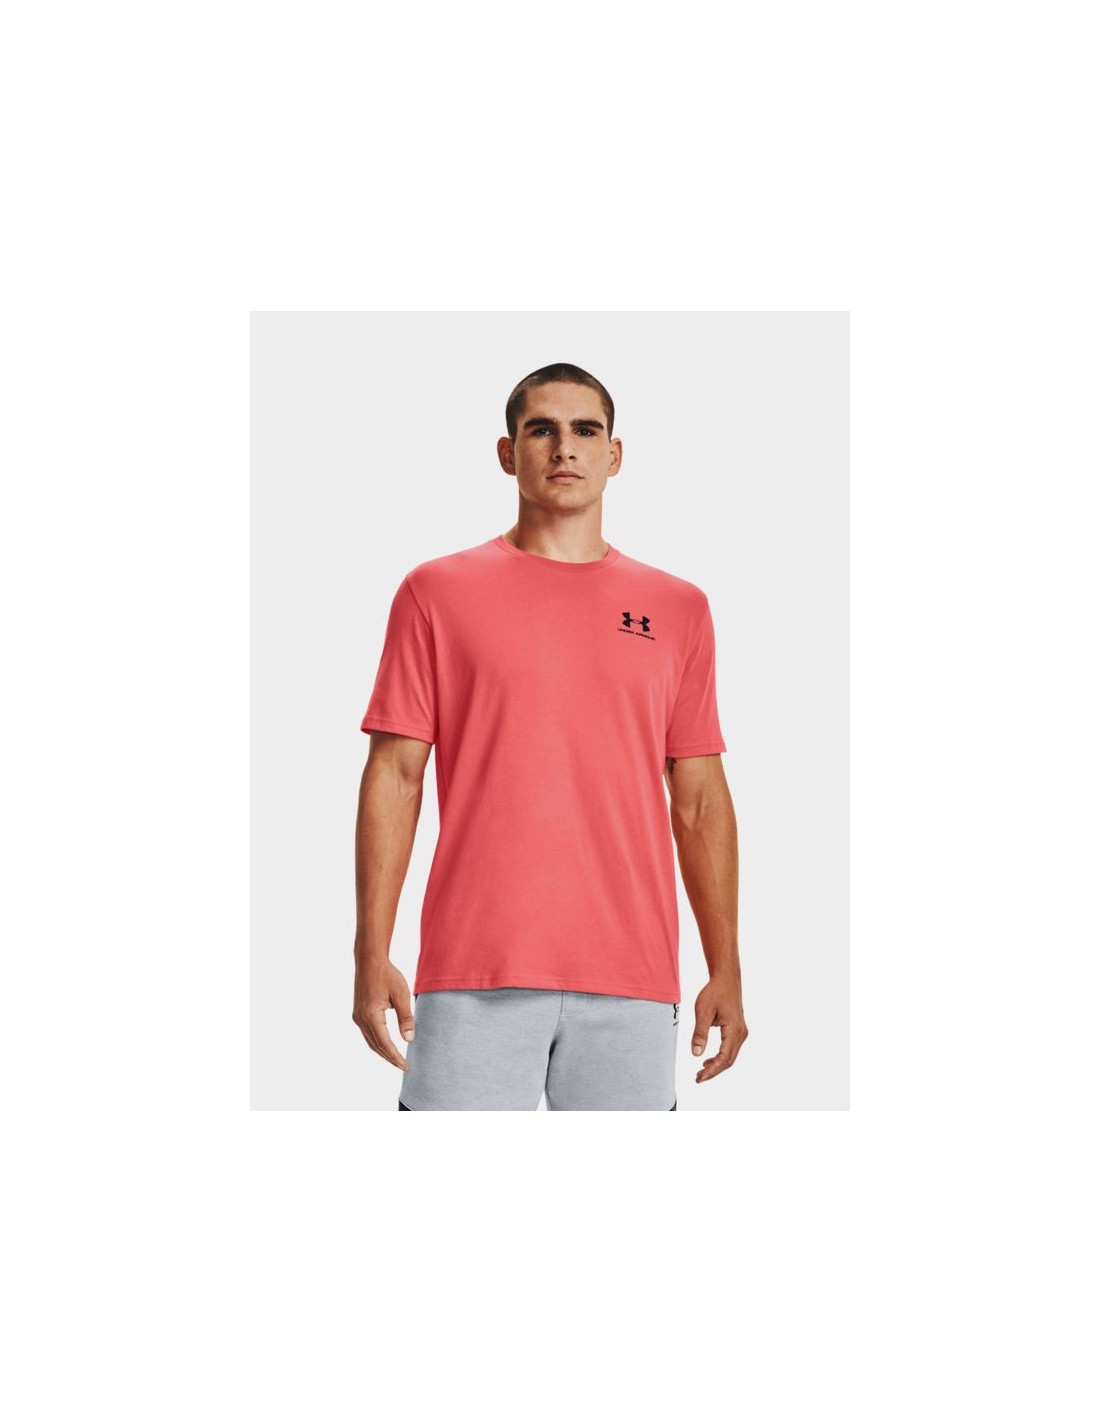 Under Armour Mens T Shirt Sportstyle Casual TShirt Cotton Training T-Shirts  Top